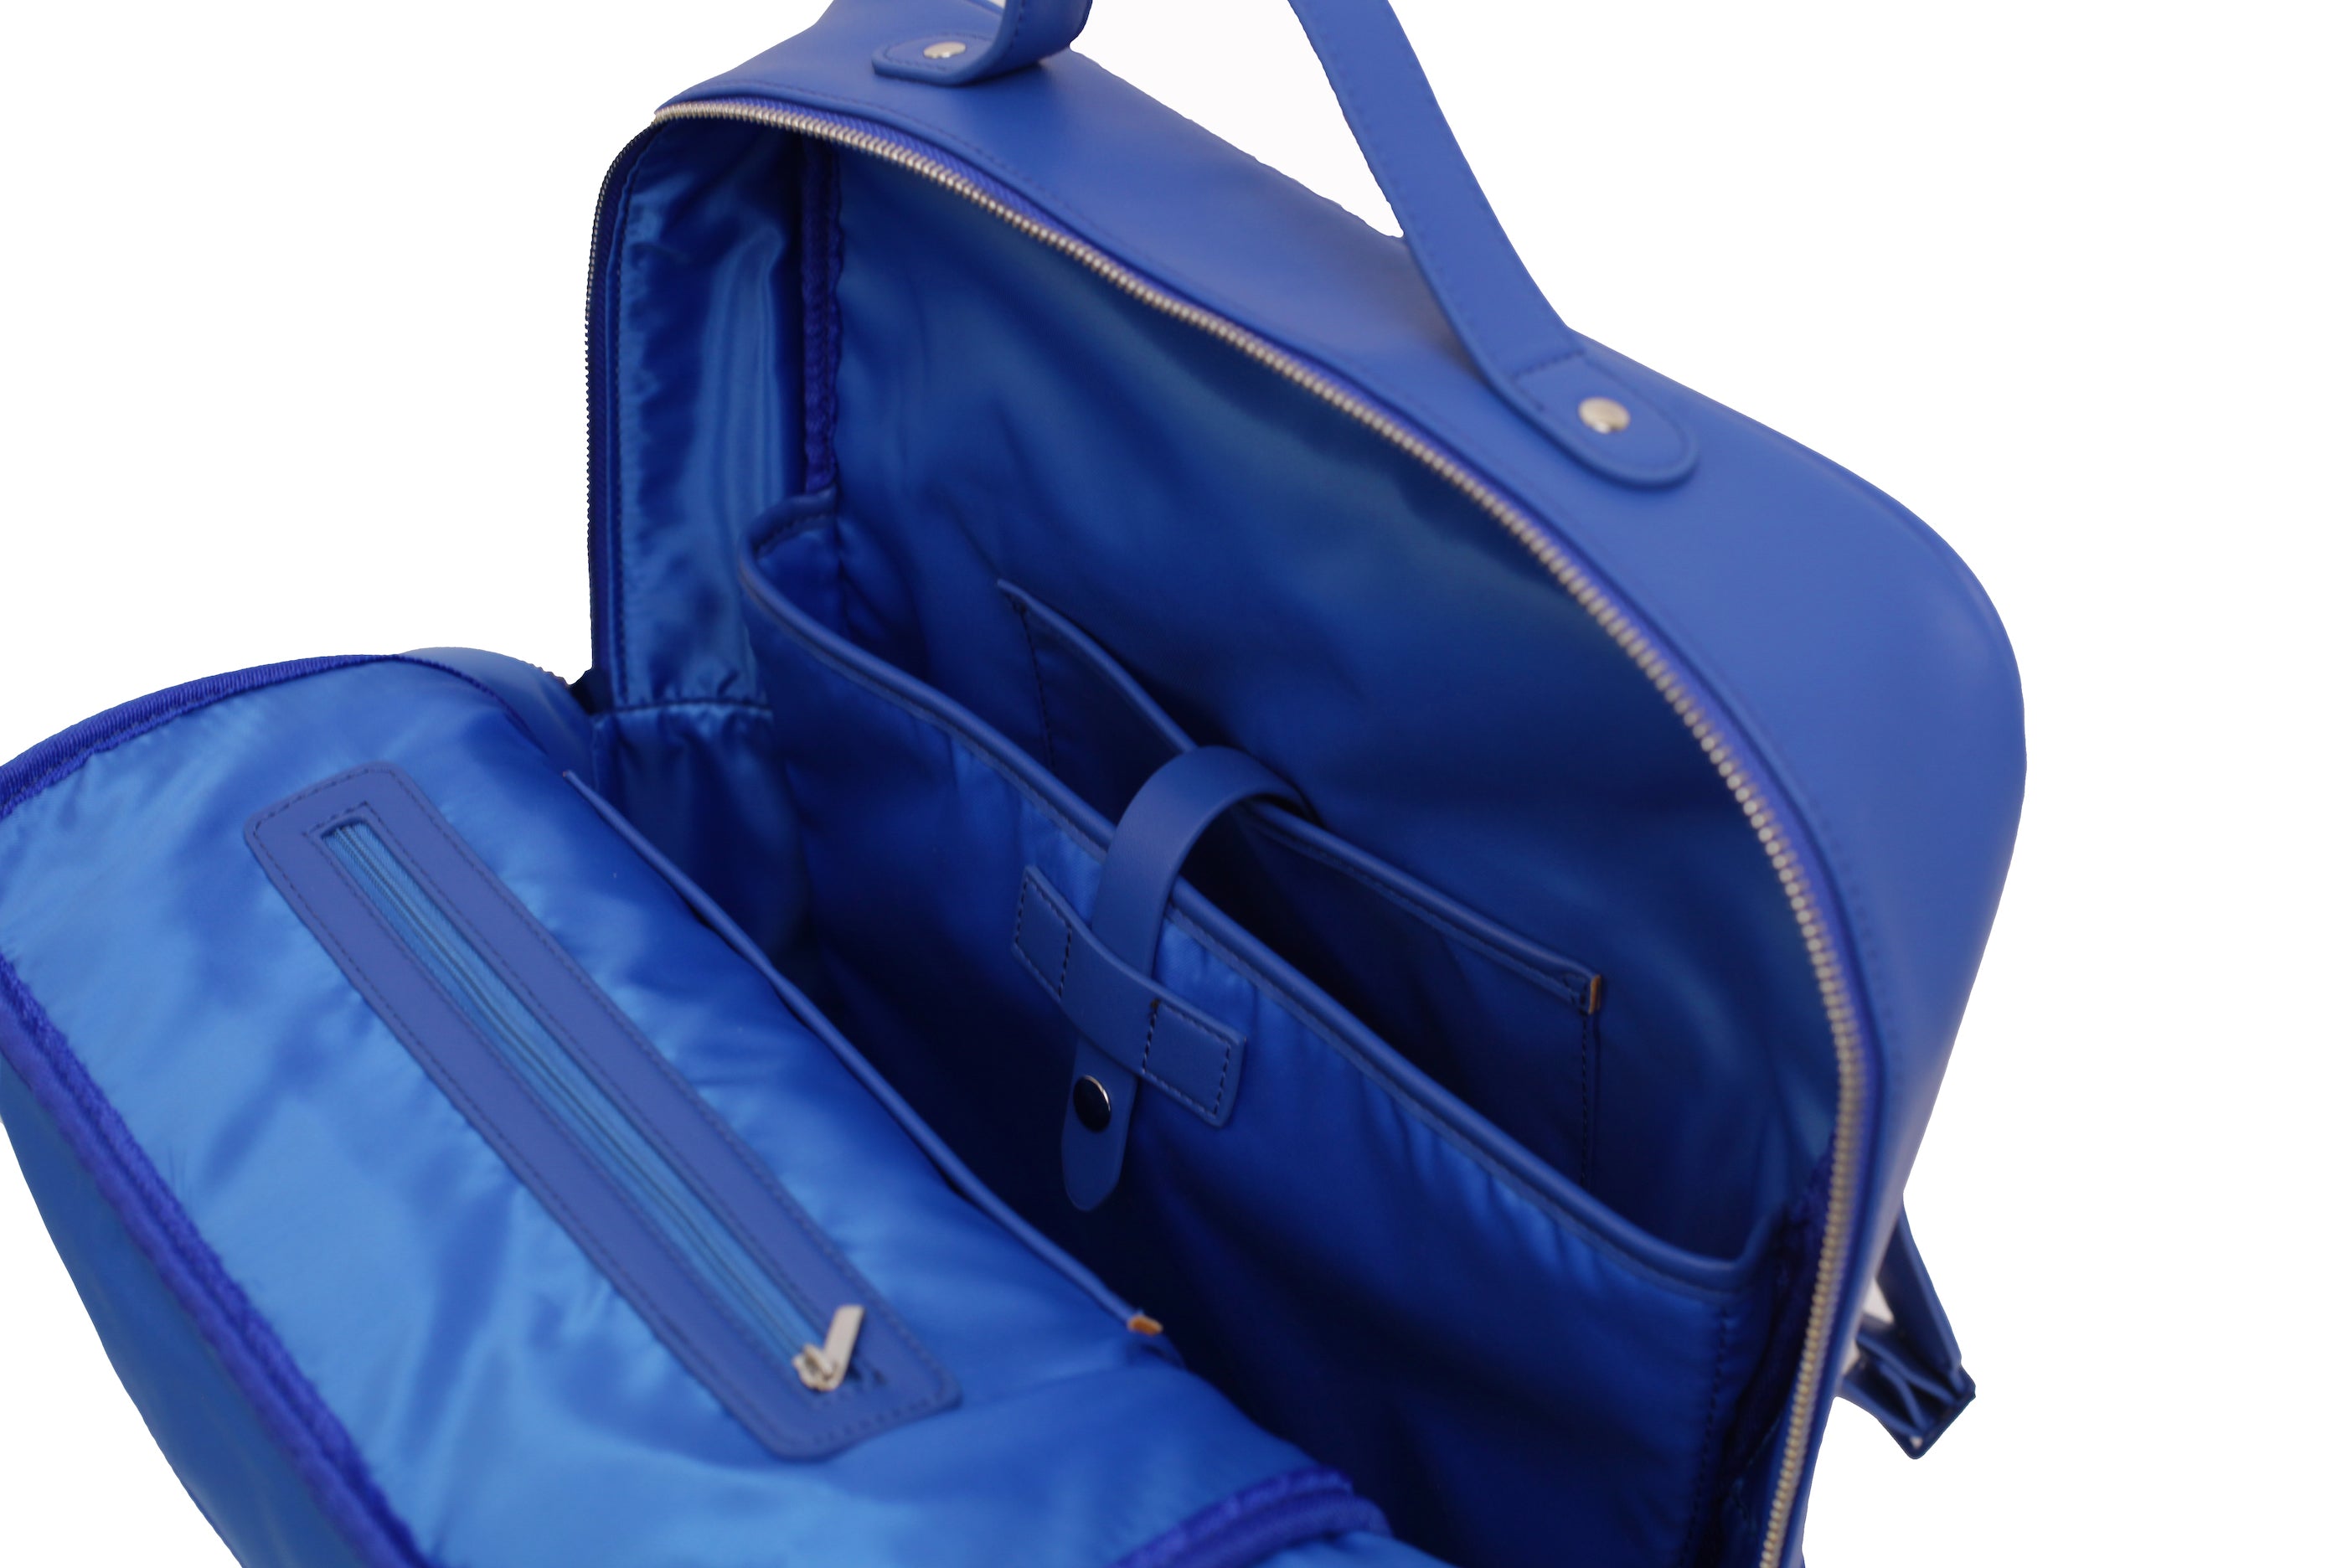 Monochrome offers stylish, elevated products in the six core colors. The Blue Backpack is simply that: blue. Features blue vegan leather. Stain resistant vegan leather. Bright blue backpack for those wanting plain and stylish backpack. Perfect for an upscale urban backpack and an everyday backpack. 